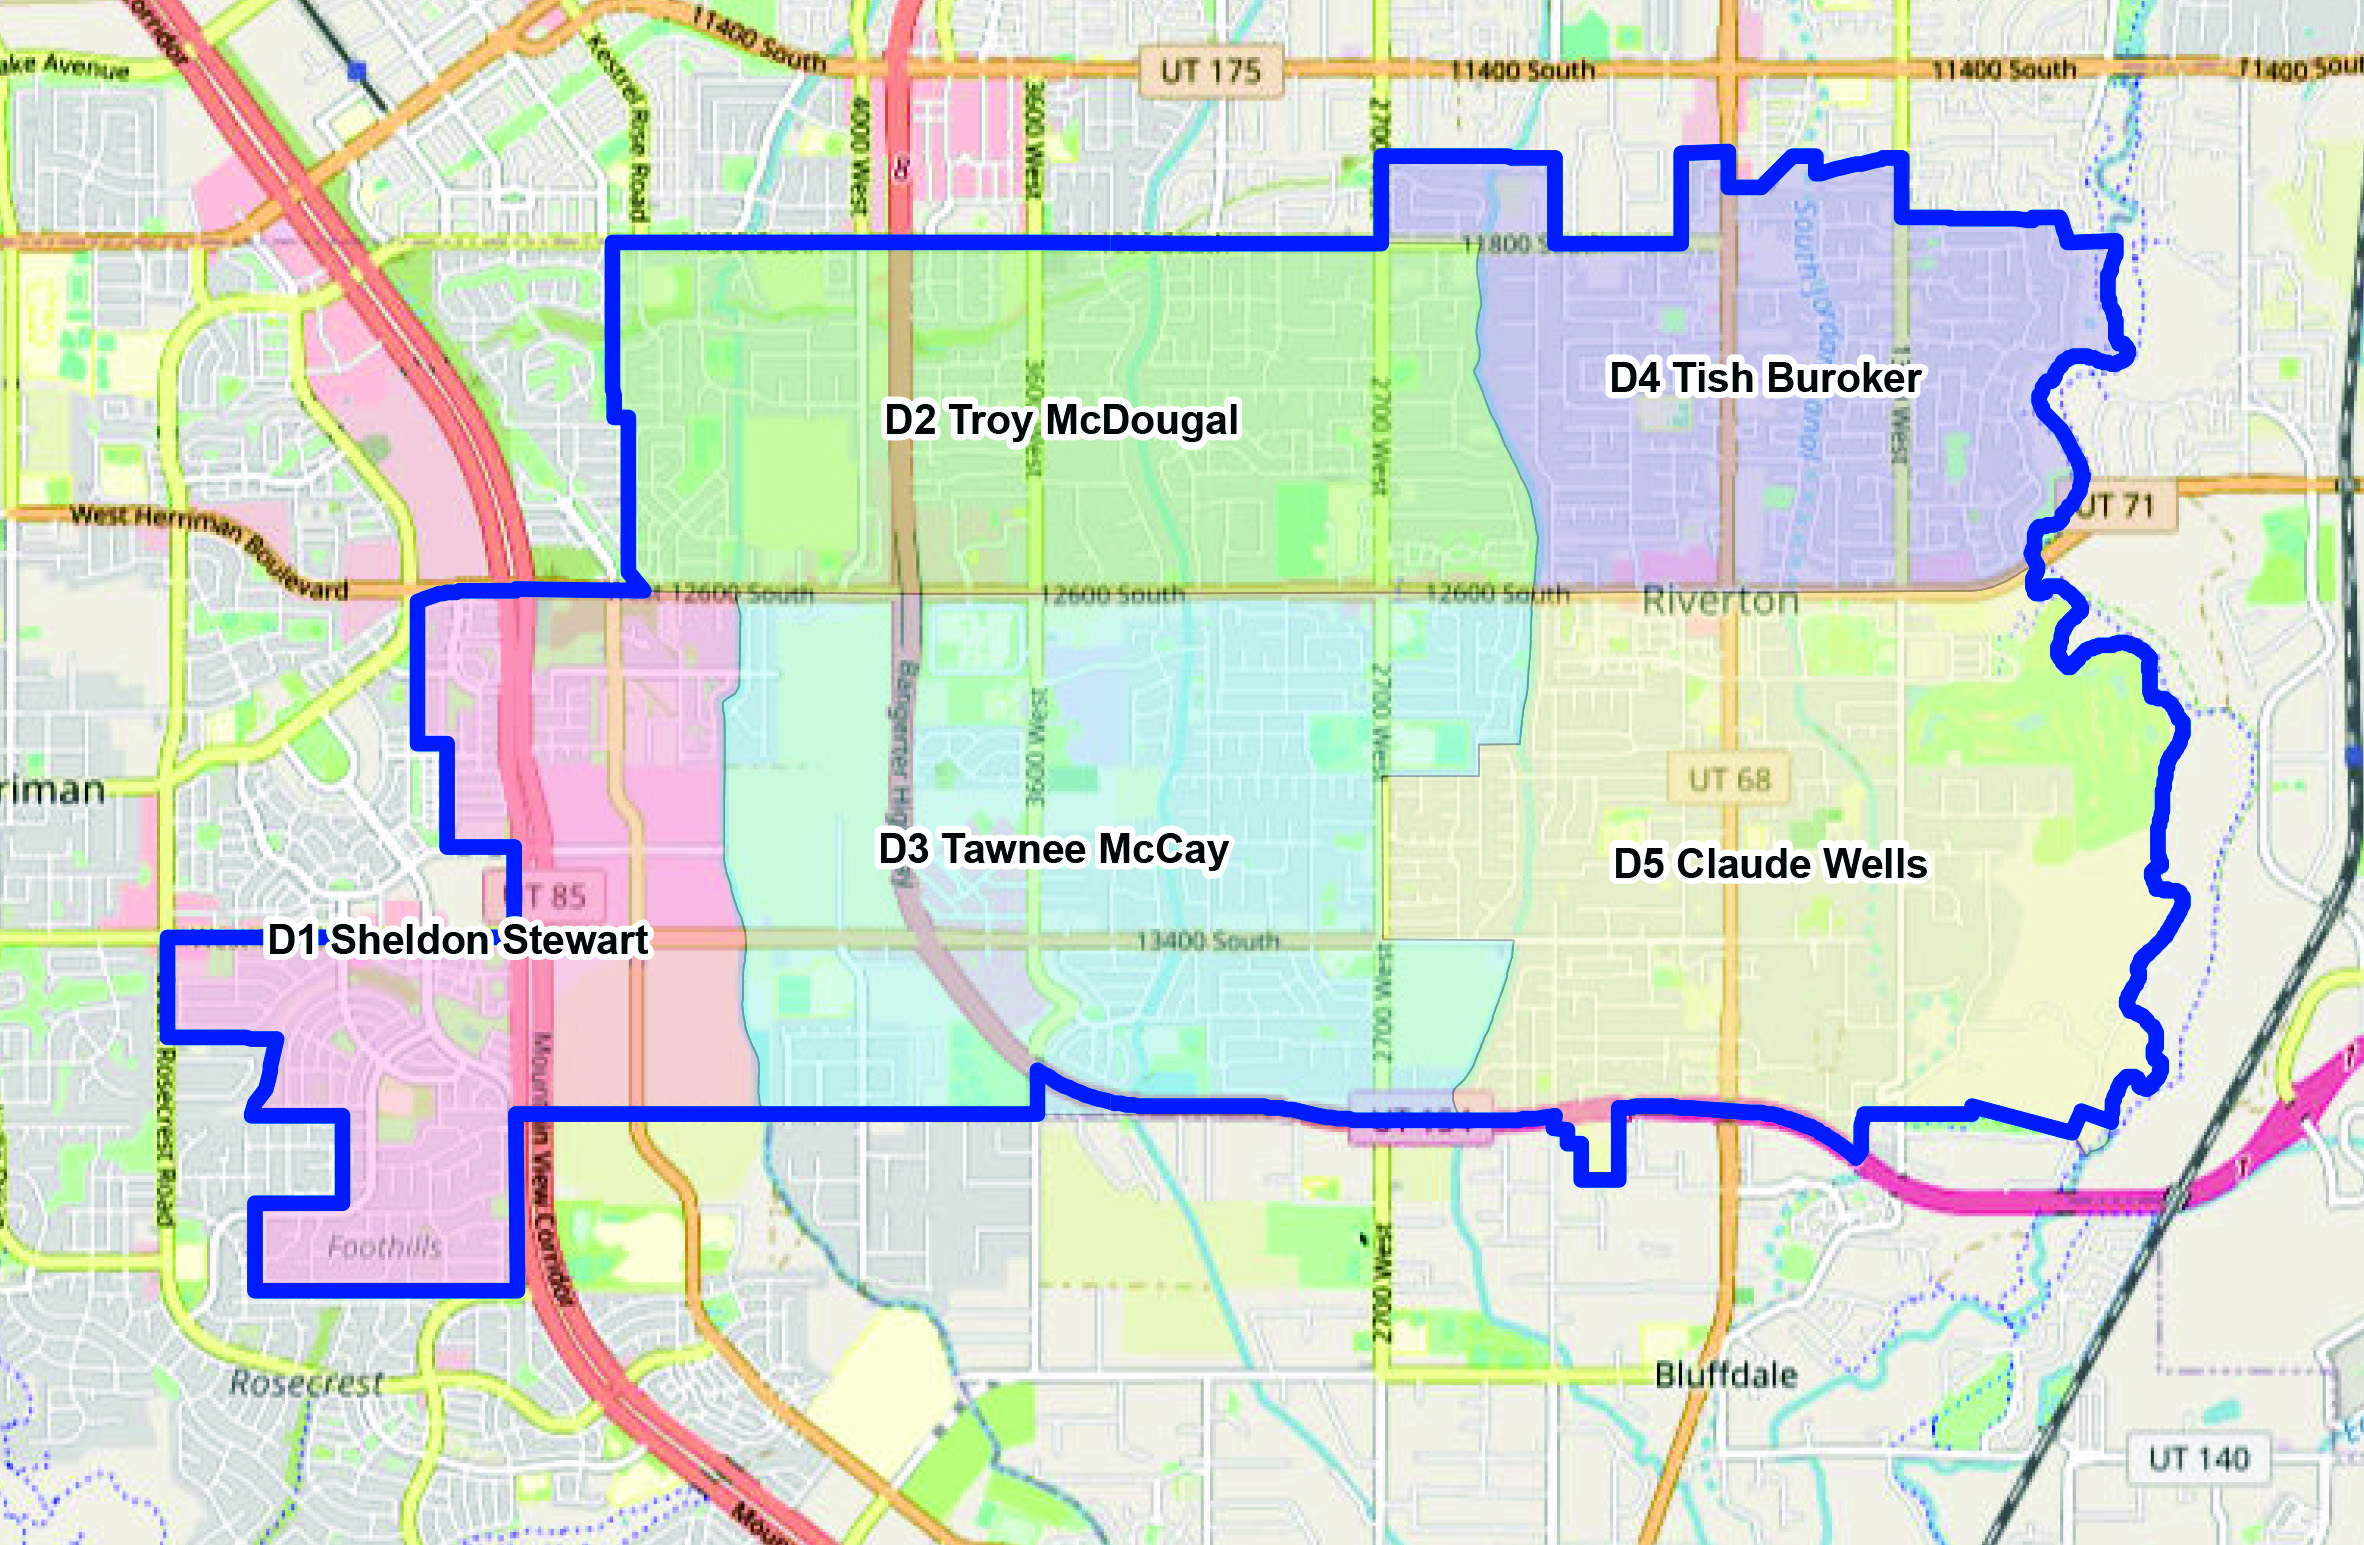 Redistricting of City Council Districts